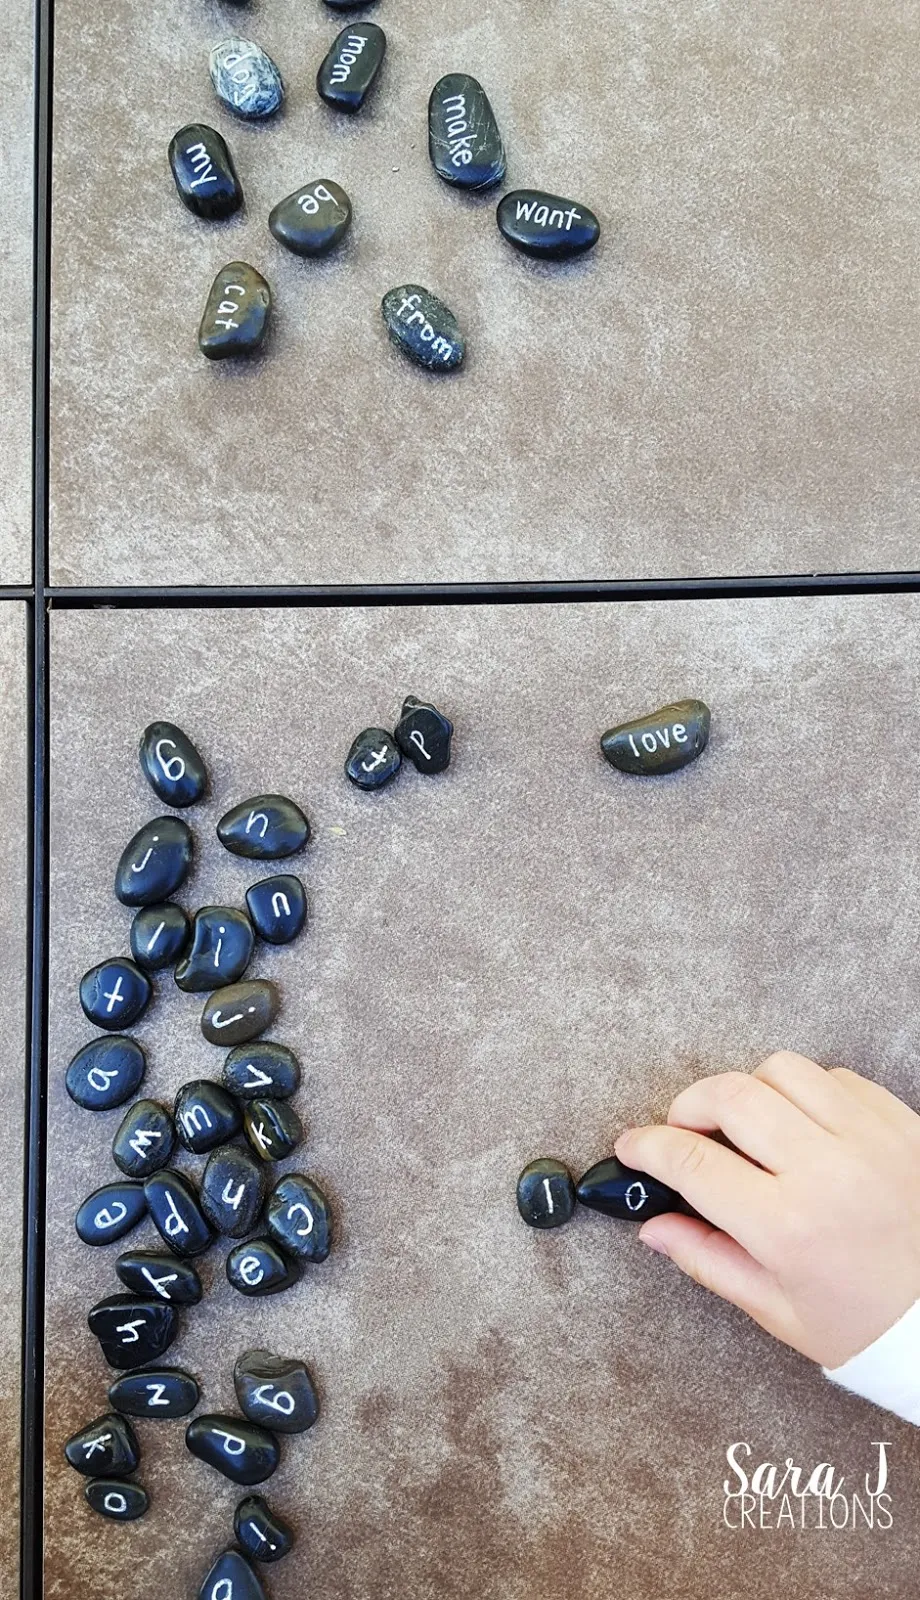 Sight word rocks are an inexpensive activity to practice sight words and the alphabet.  Such a great hands on activity for preschool, kindergarten and even first or second grade.